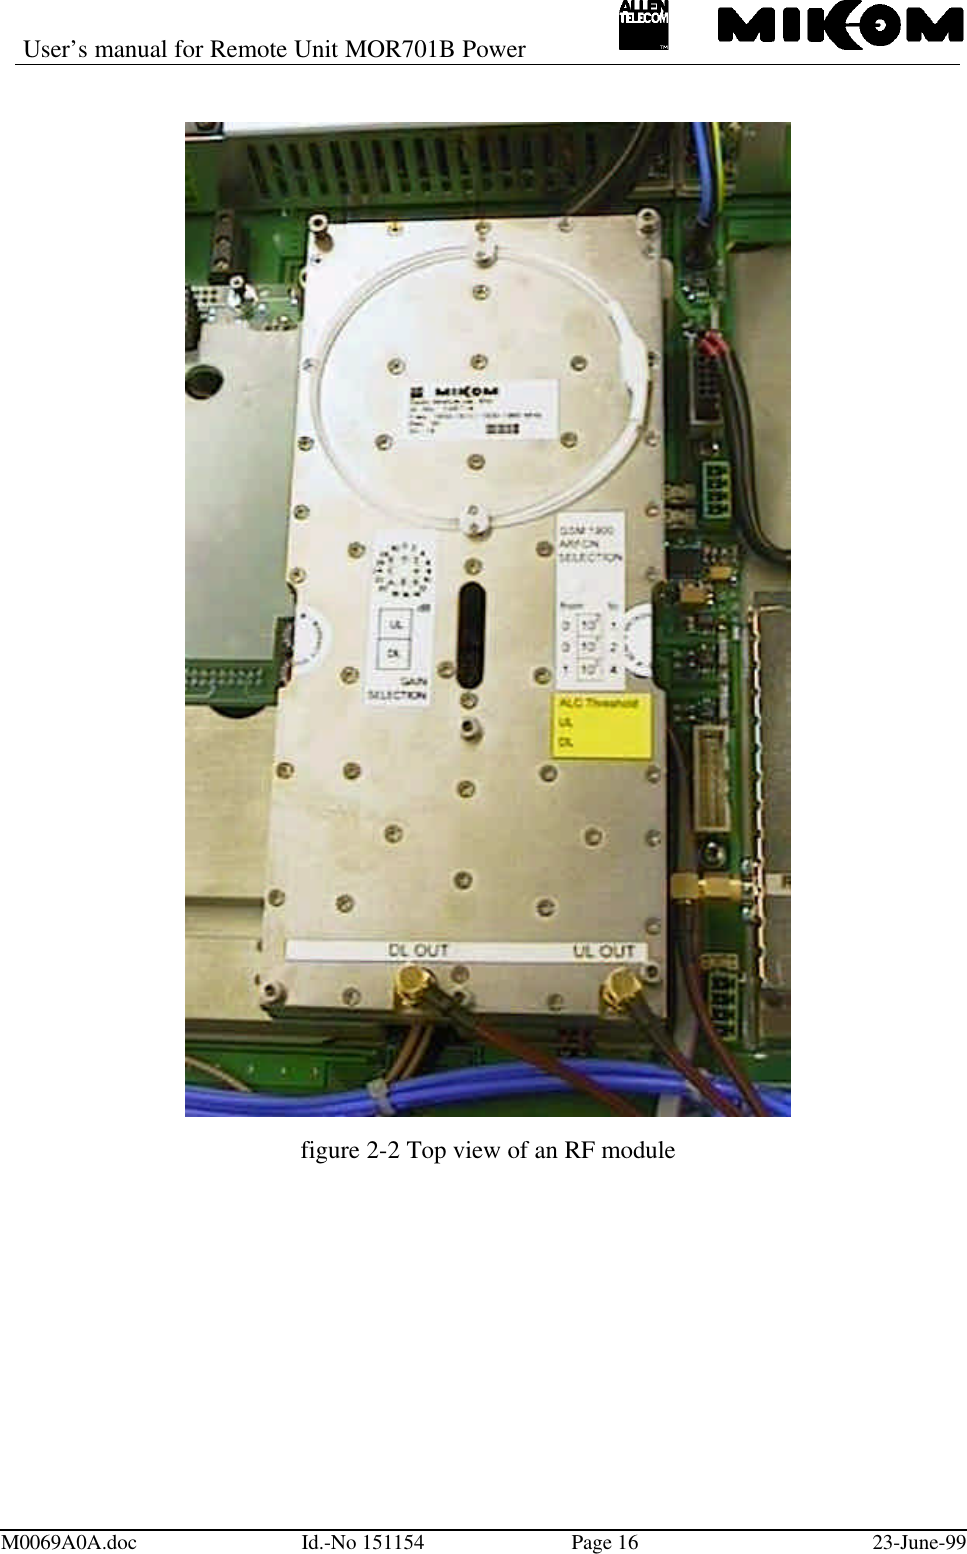 User’s manual for Remote Unit MOR701B PowerM0069A0A.doc Id.-No 151154 Page 16 23-June-99figure 2-2 Top view of an RF module